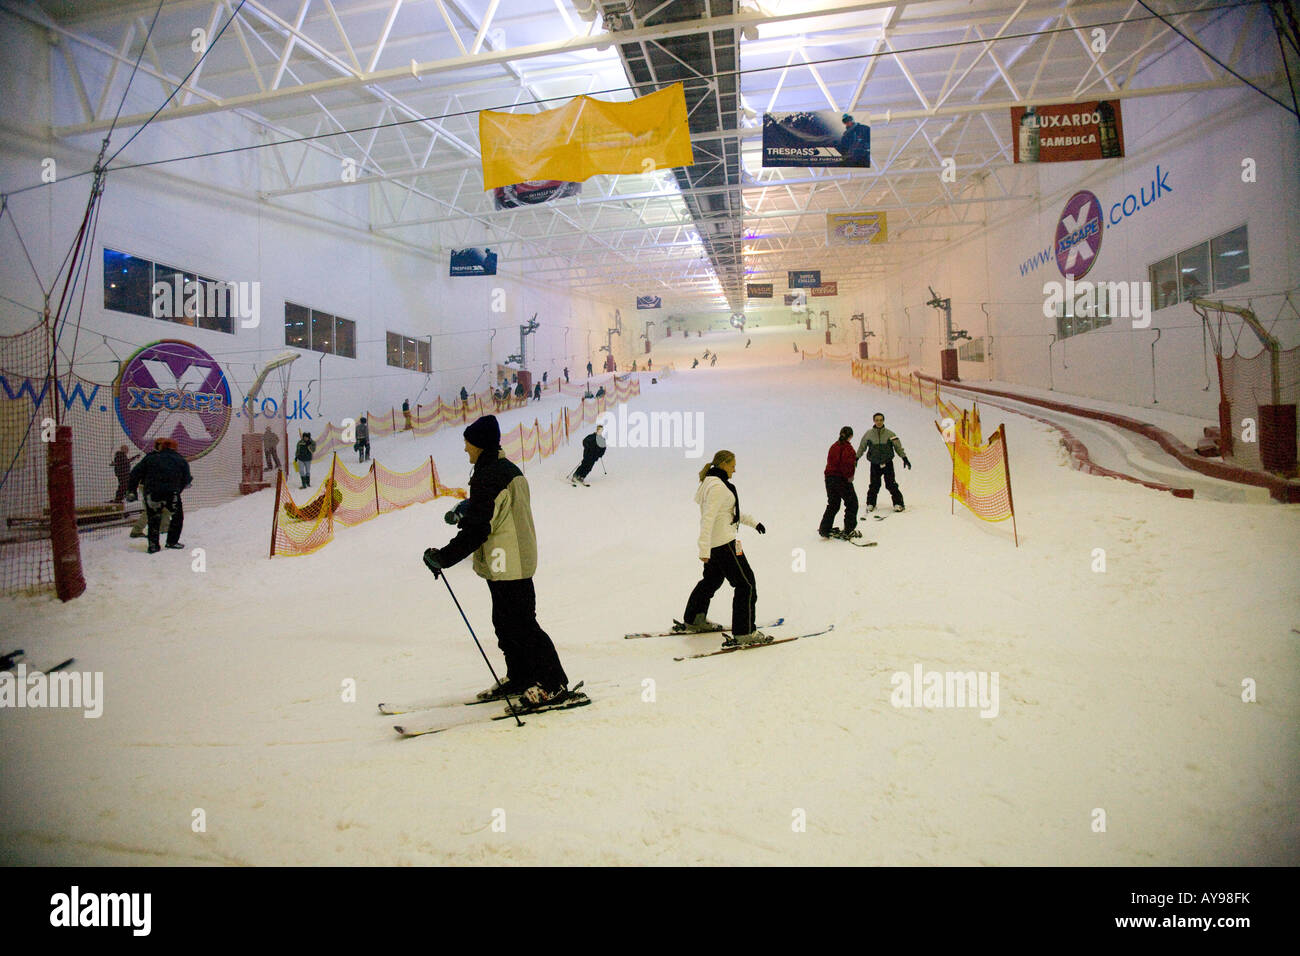 Xscape Ski Stock Photos Xscape Ski Stock Images Alamy with Amazing  how much to ski at xscape for Desire